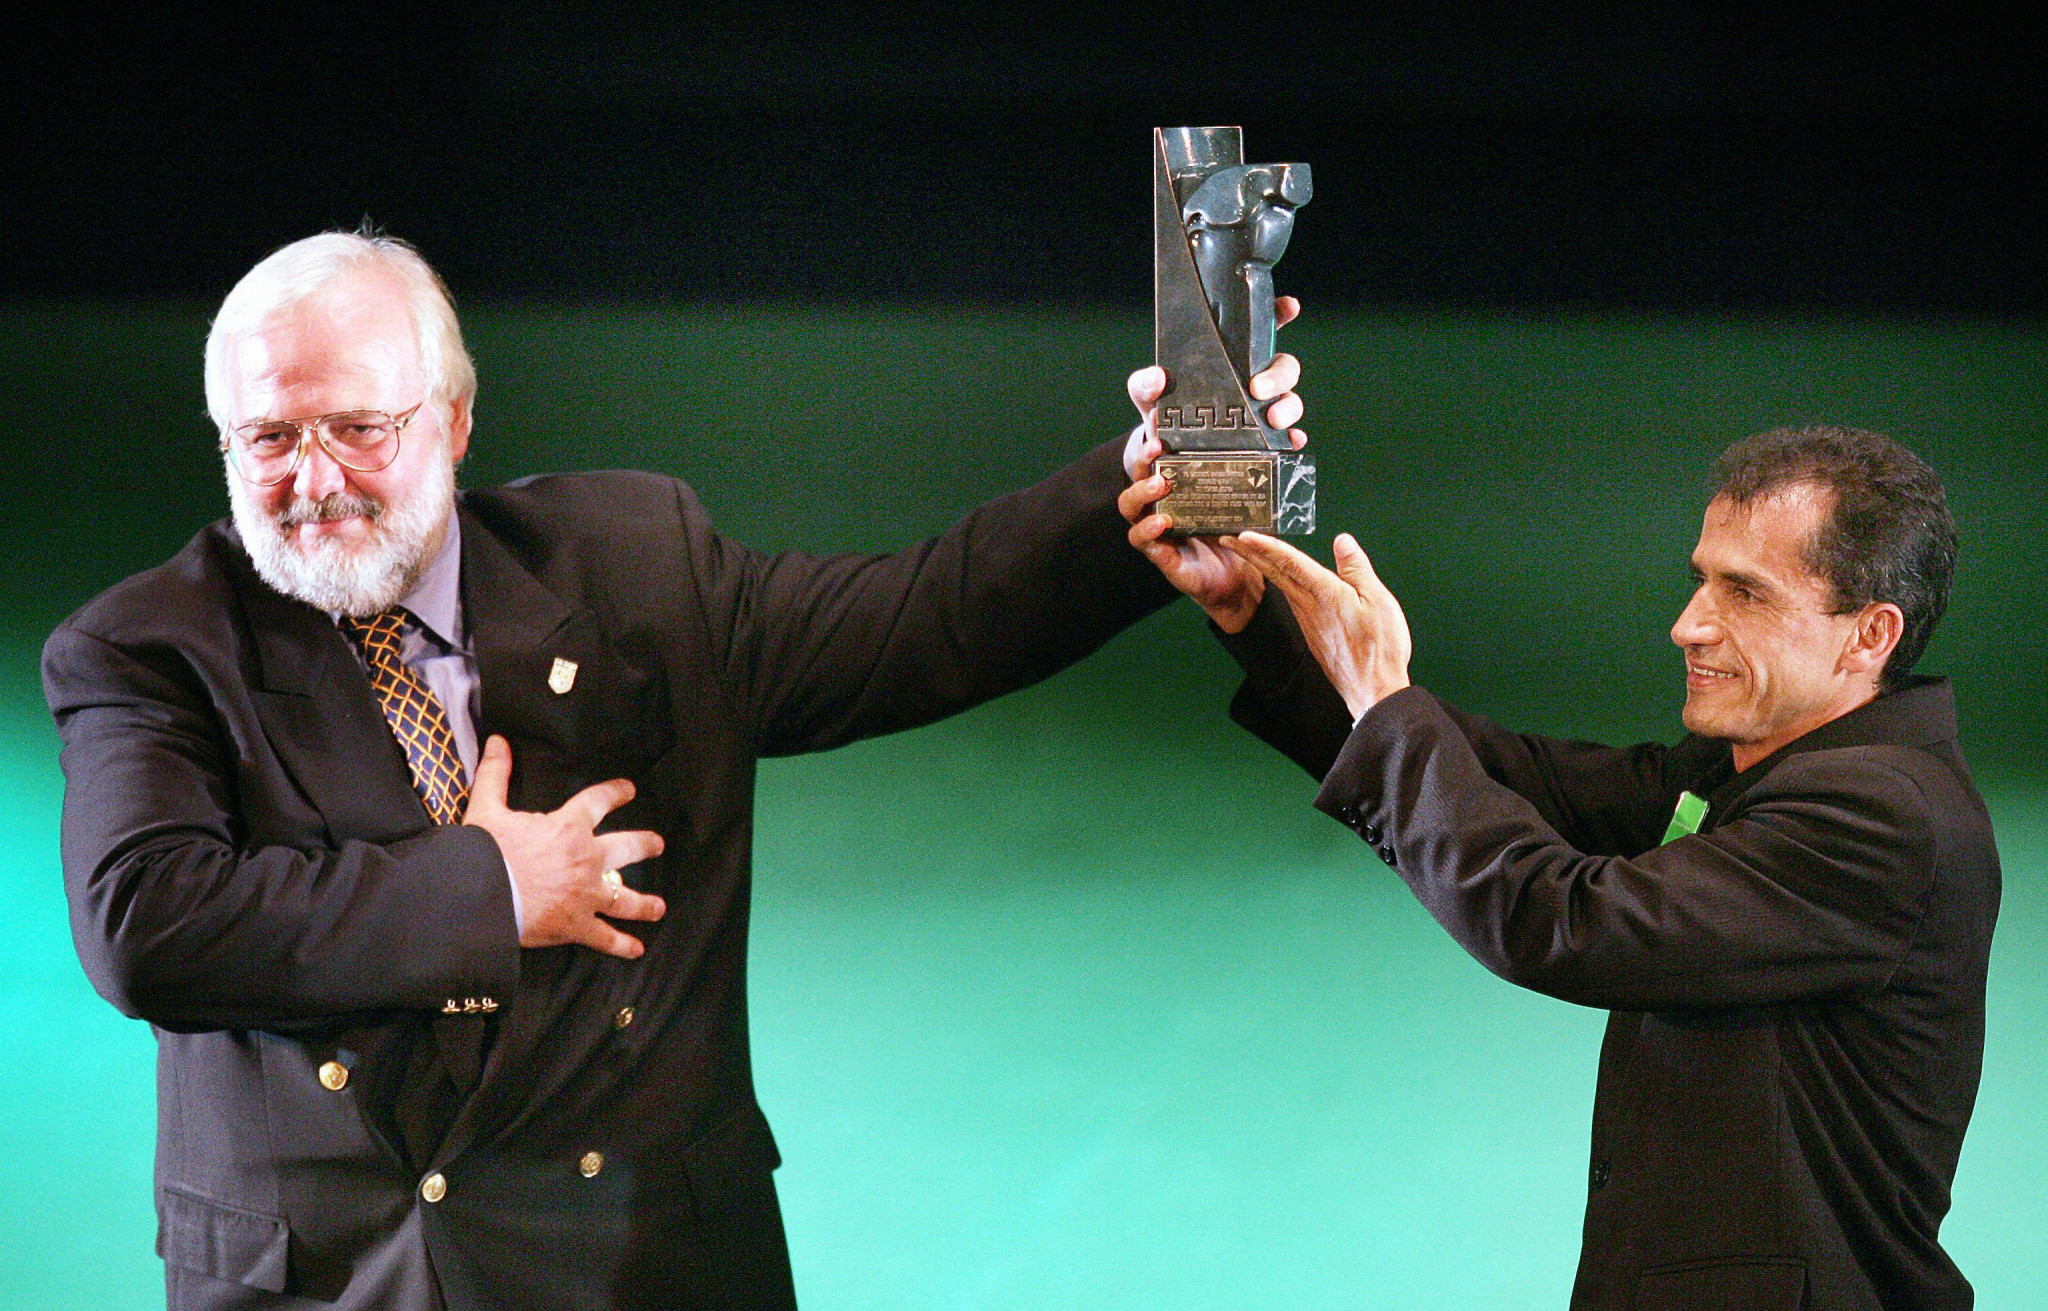 Polyvios Kossivas, left, received the 2004 Prêmio Brasil Olímpico from Athens 2004 marathon bronze medallist Vanderlei de Lima for his actions which helped him after he was attacked during the race ©Getty Images